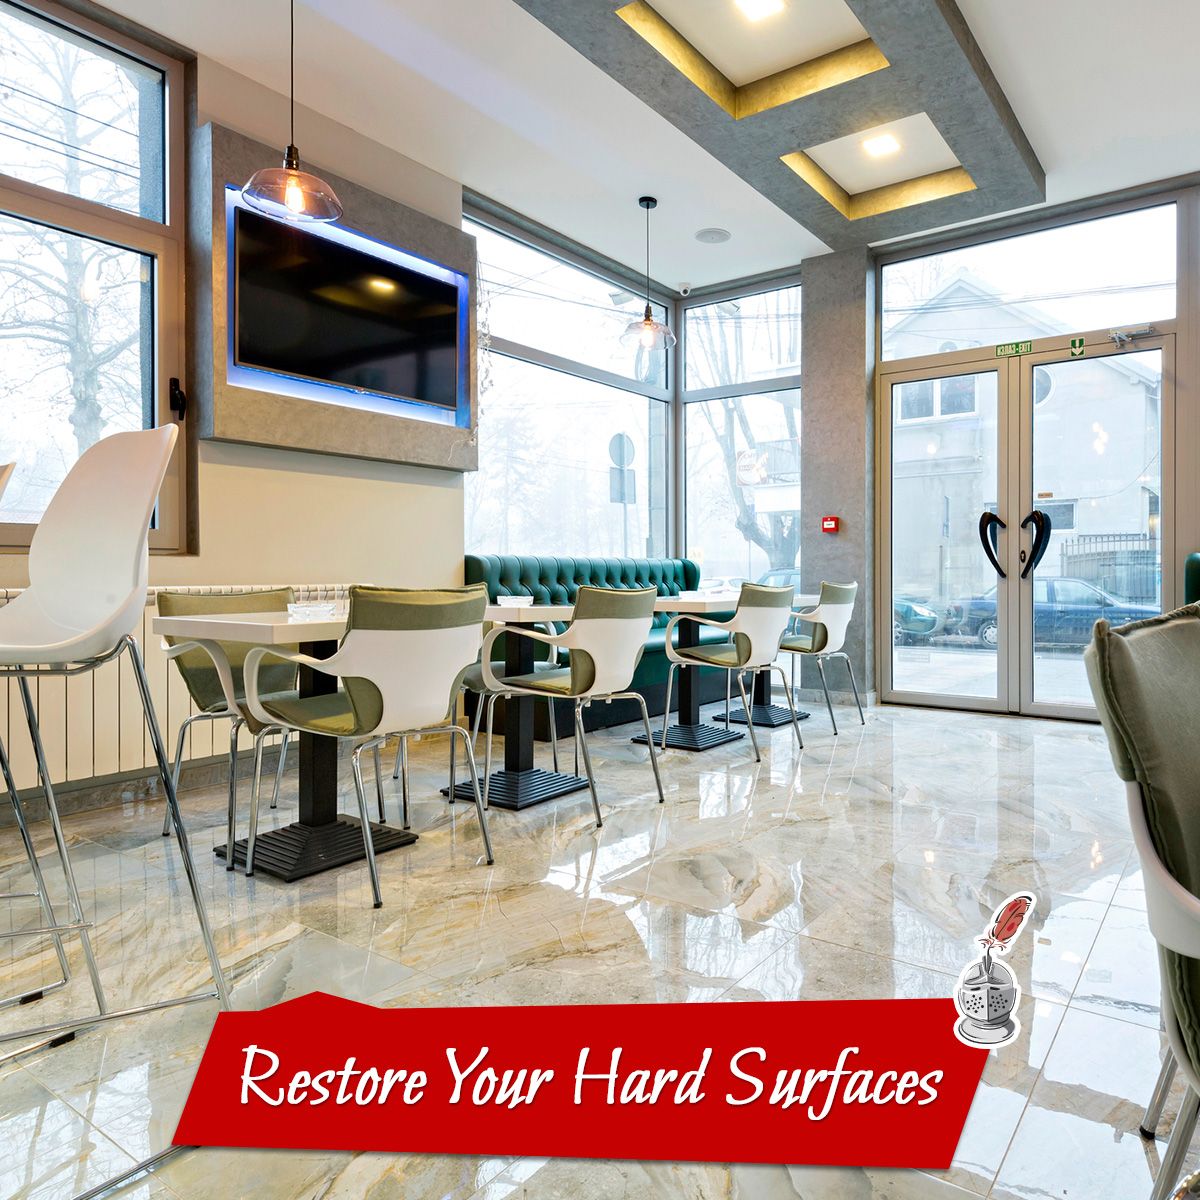 Restore Your Hard Surfaces